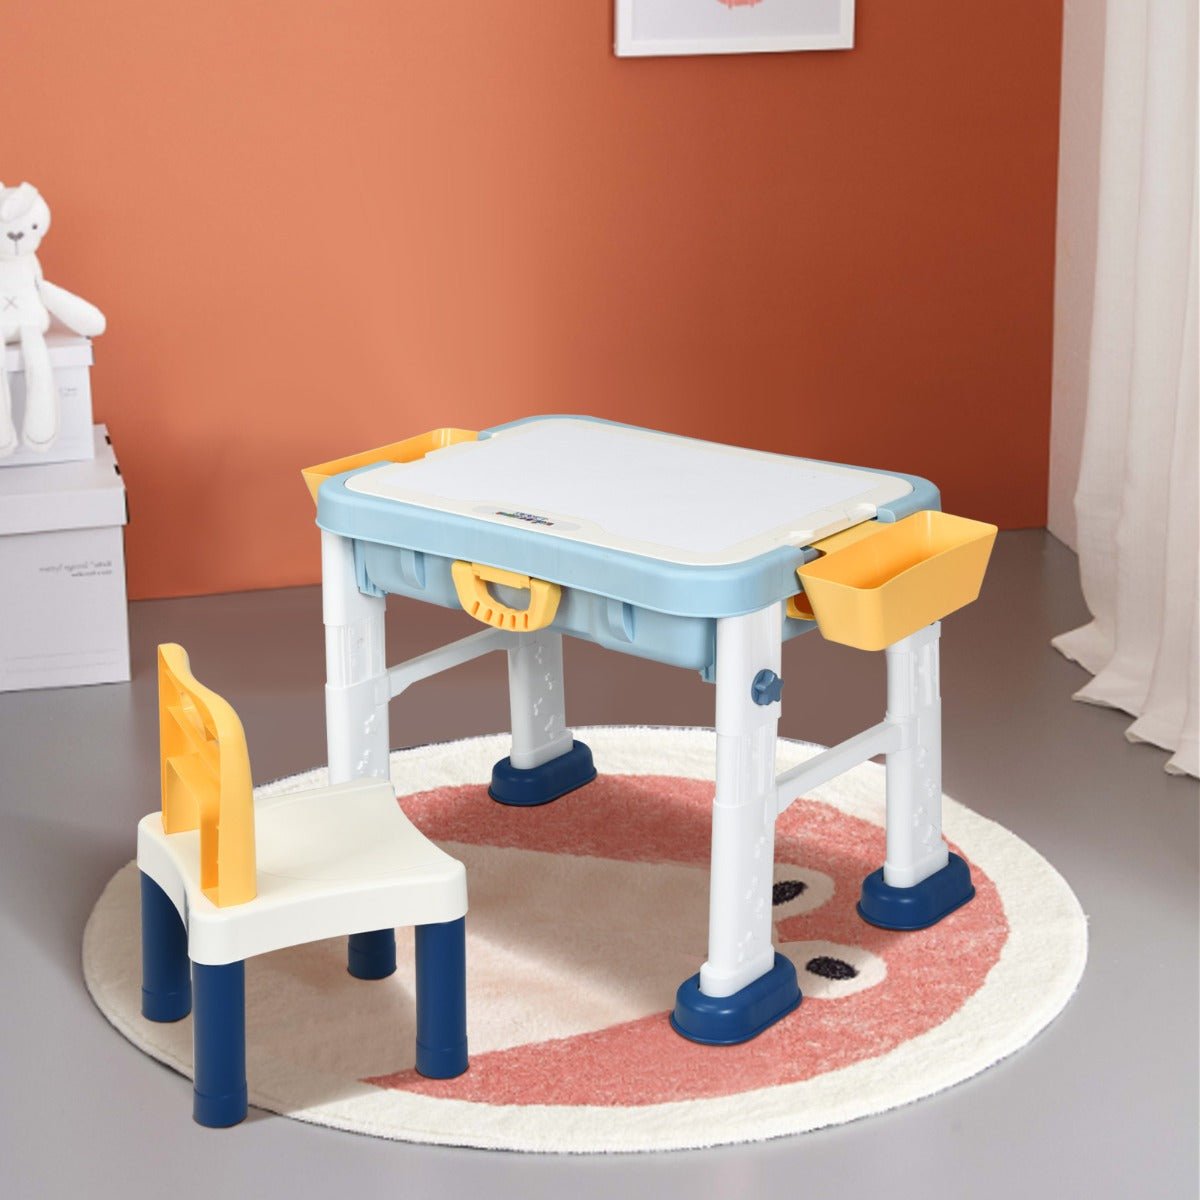 Build, Play, Learn: 6 in 1 Building Block Table with Storage